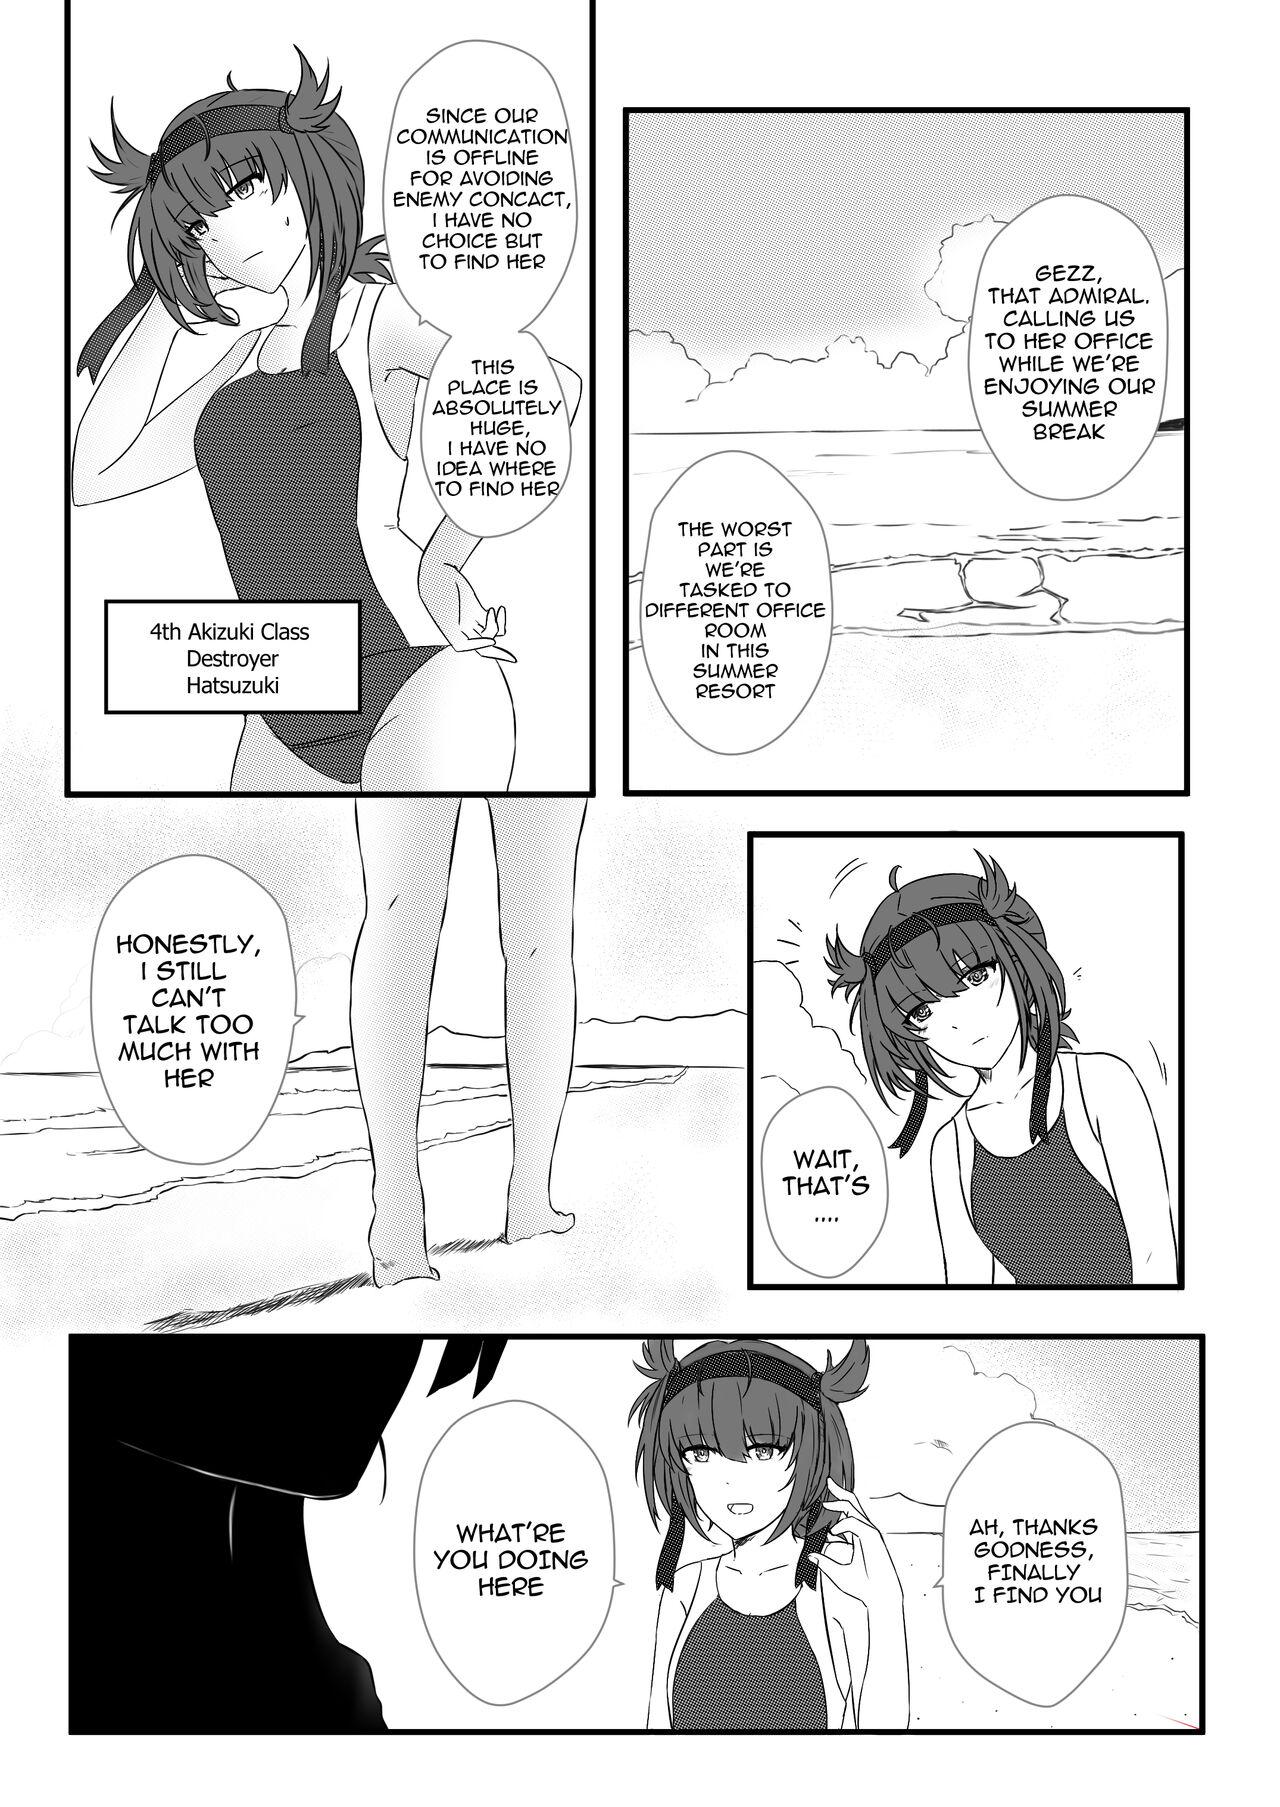 Amadora clear moon in the winter - Kantai collection Thot - Page 2